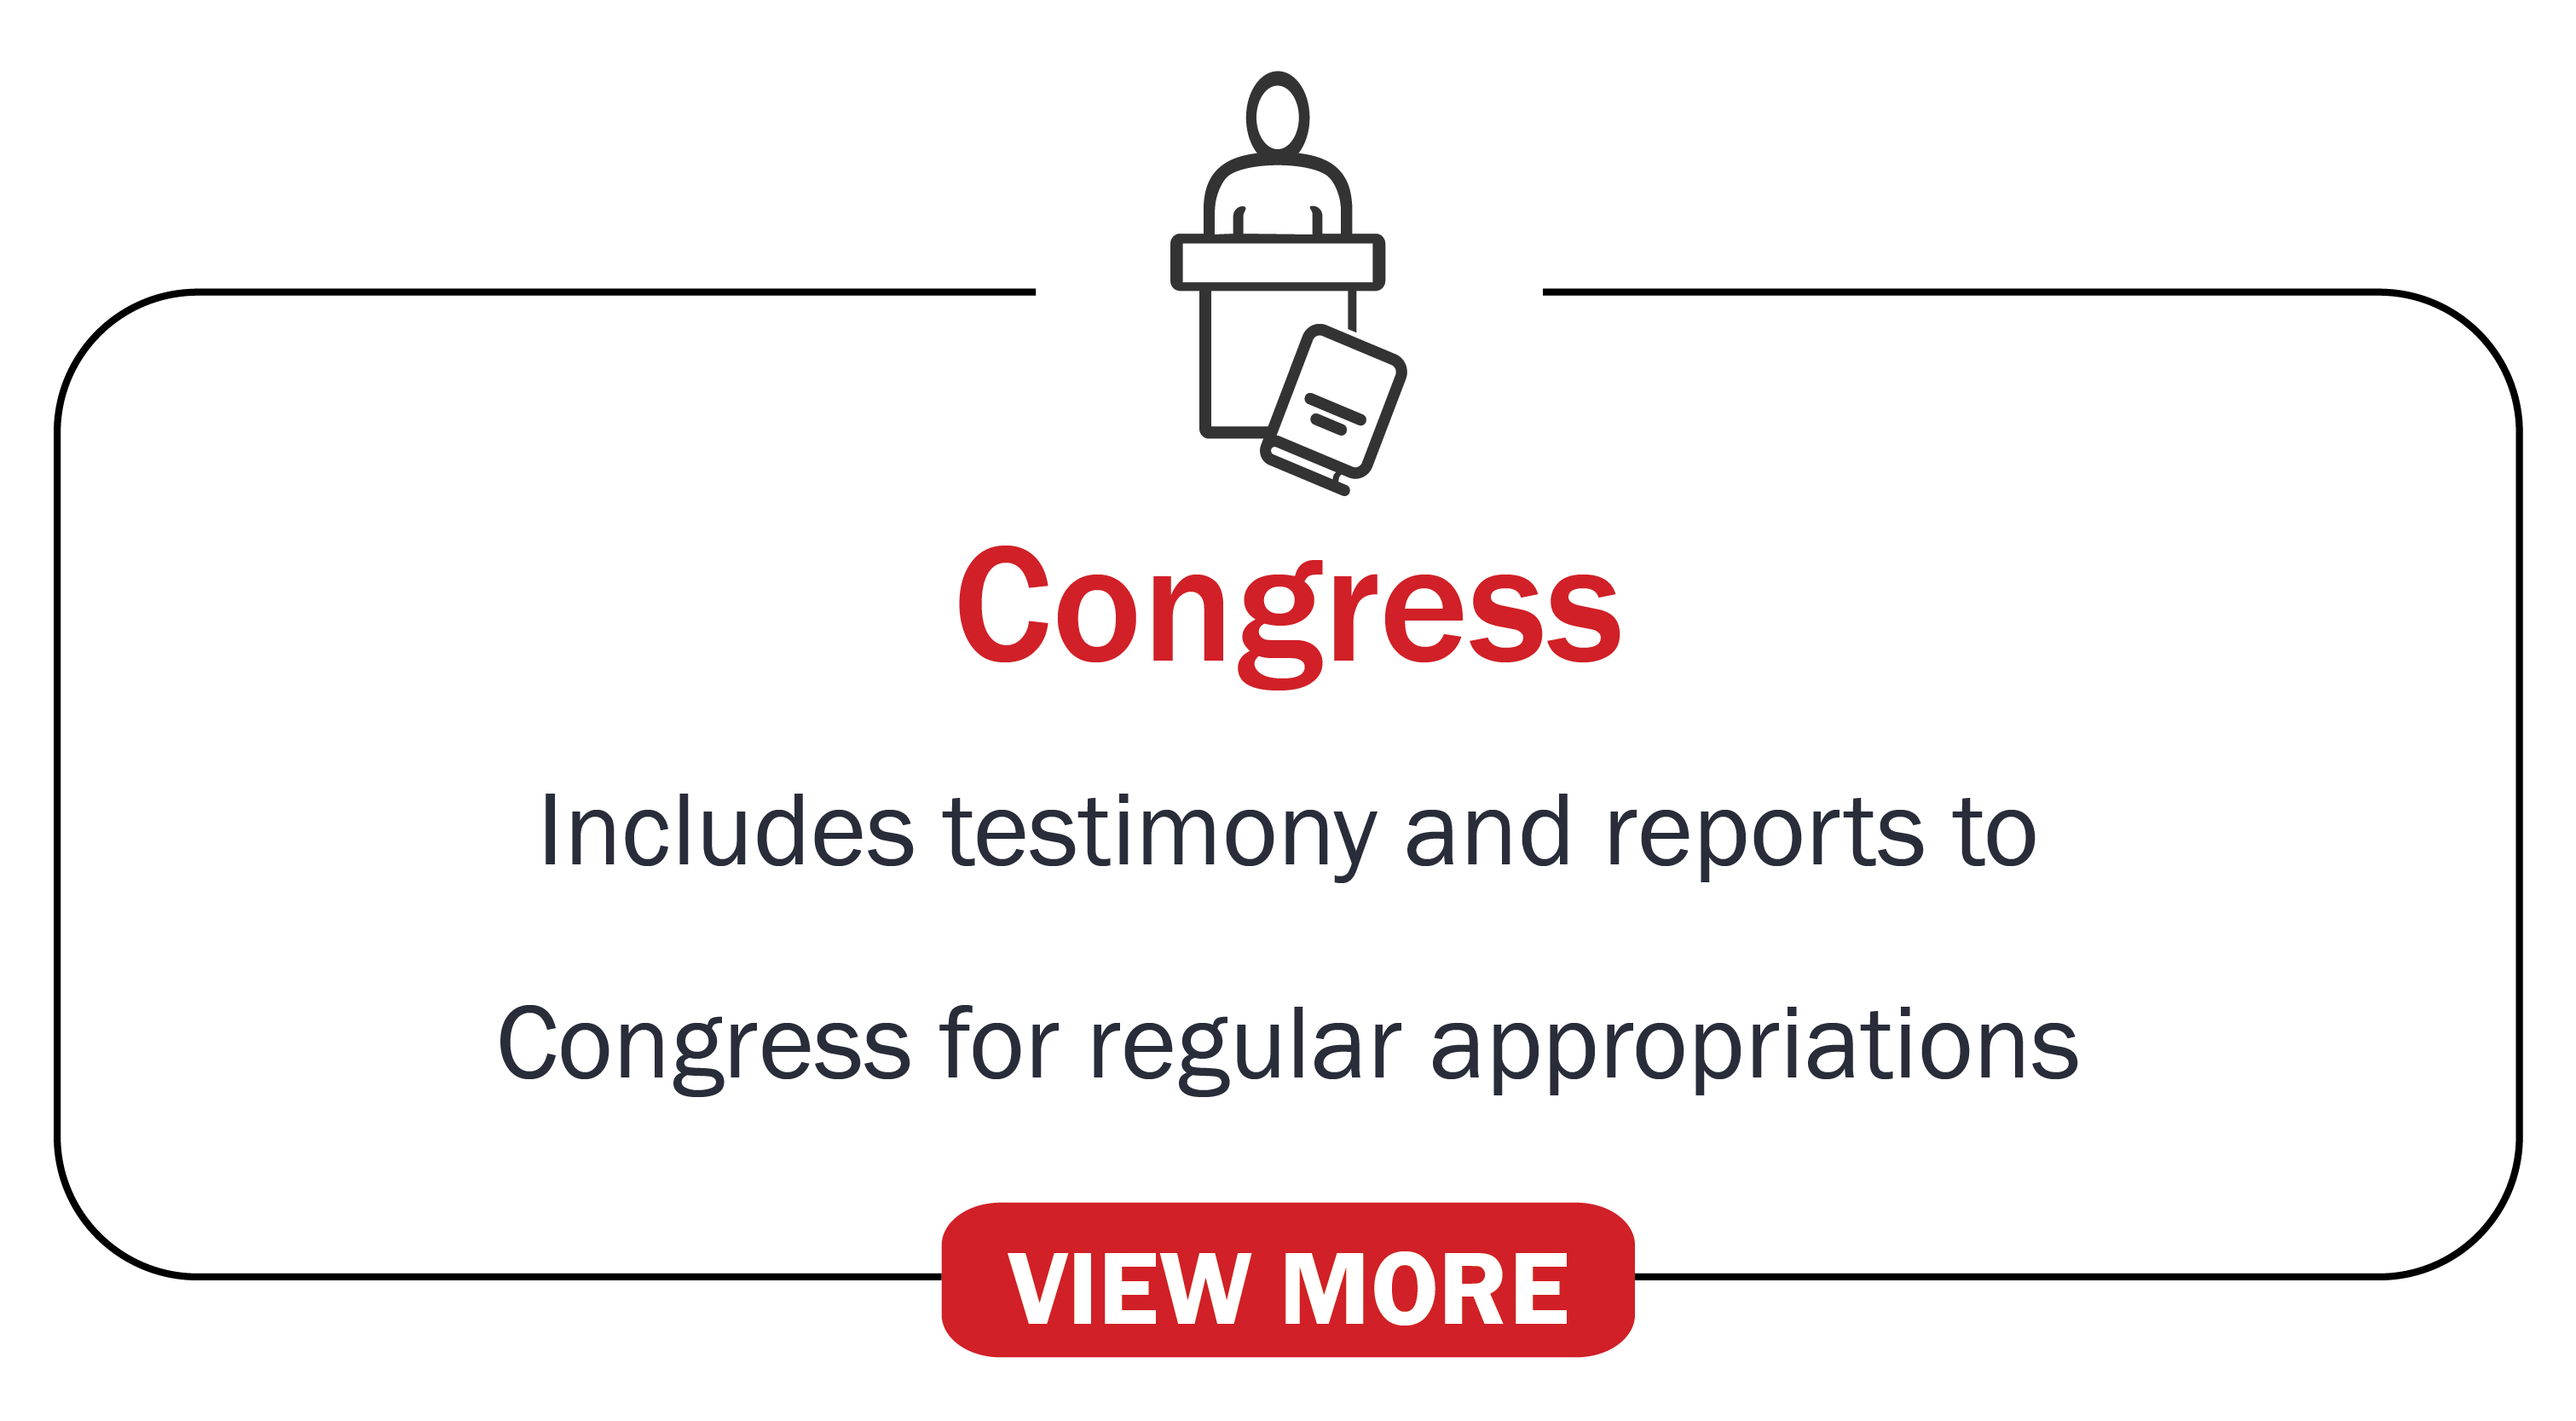 Congress: Includes testimony and reports to Congress for regular appropriations